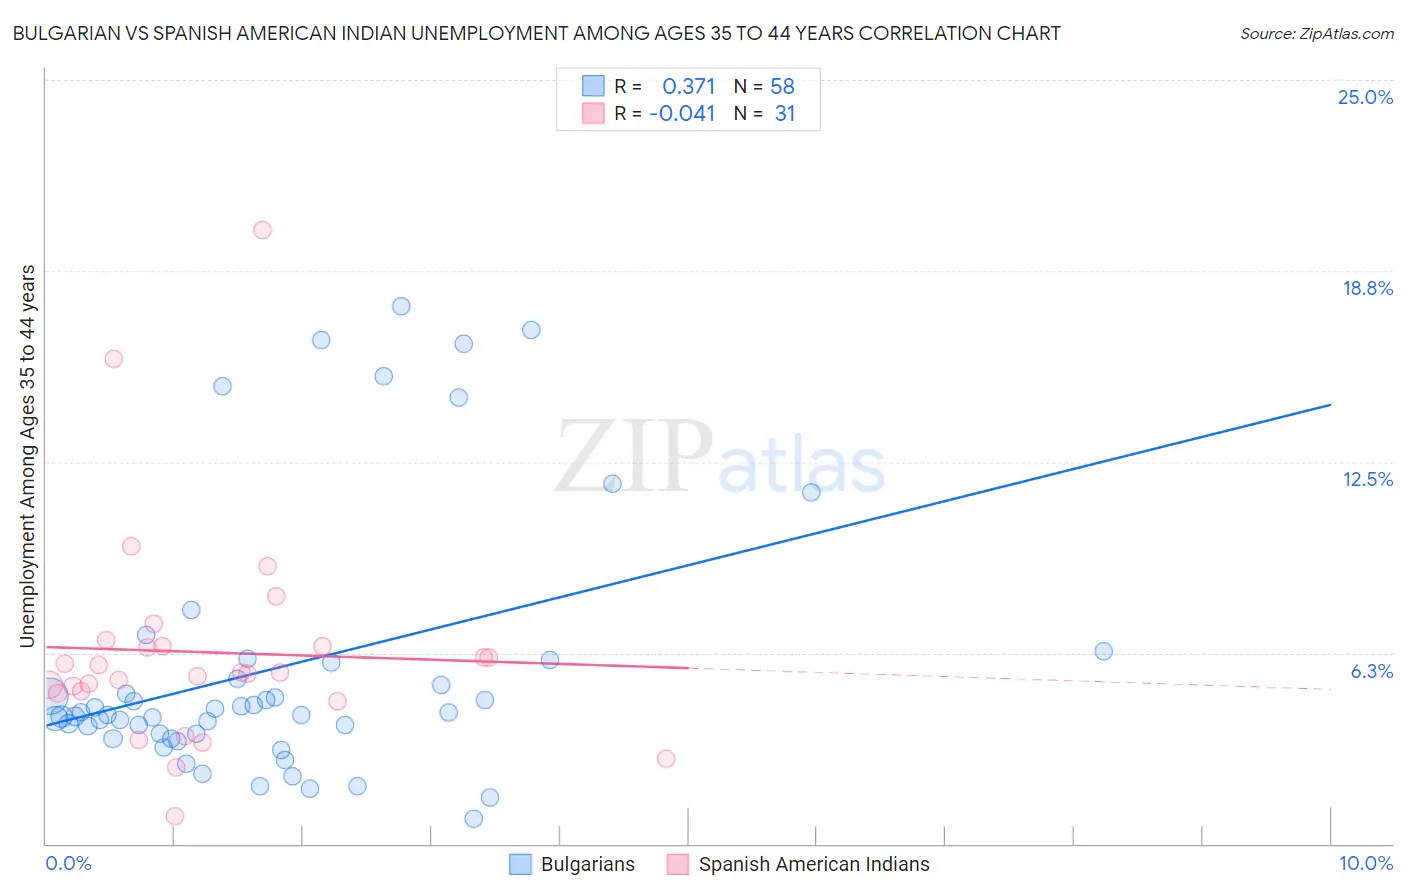 Bulgarian vs Spanish American Indian Unemployment Among Ages 35 to 44 years